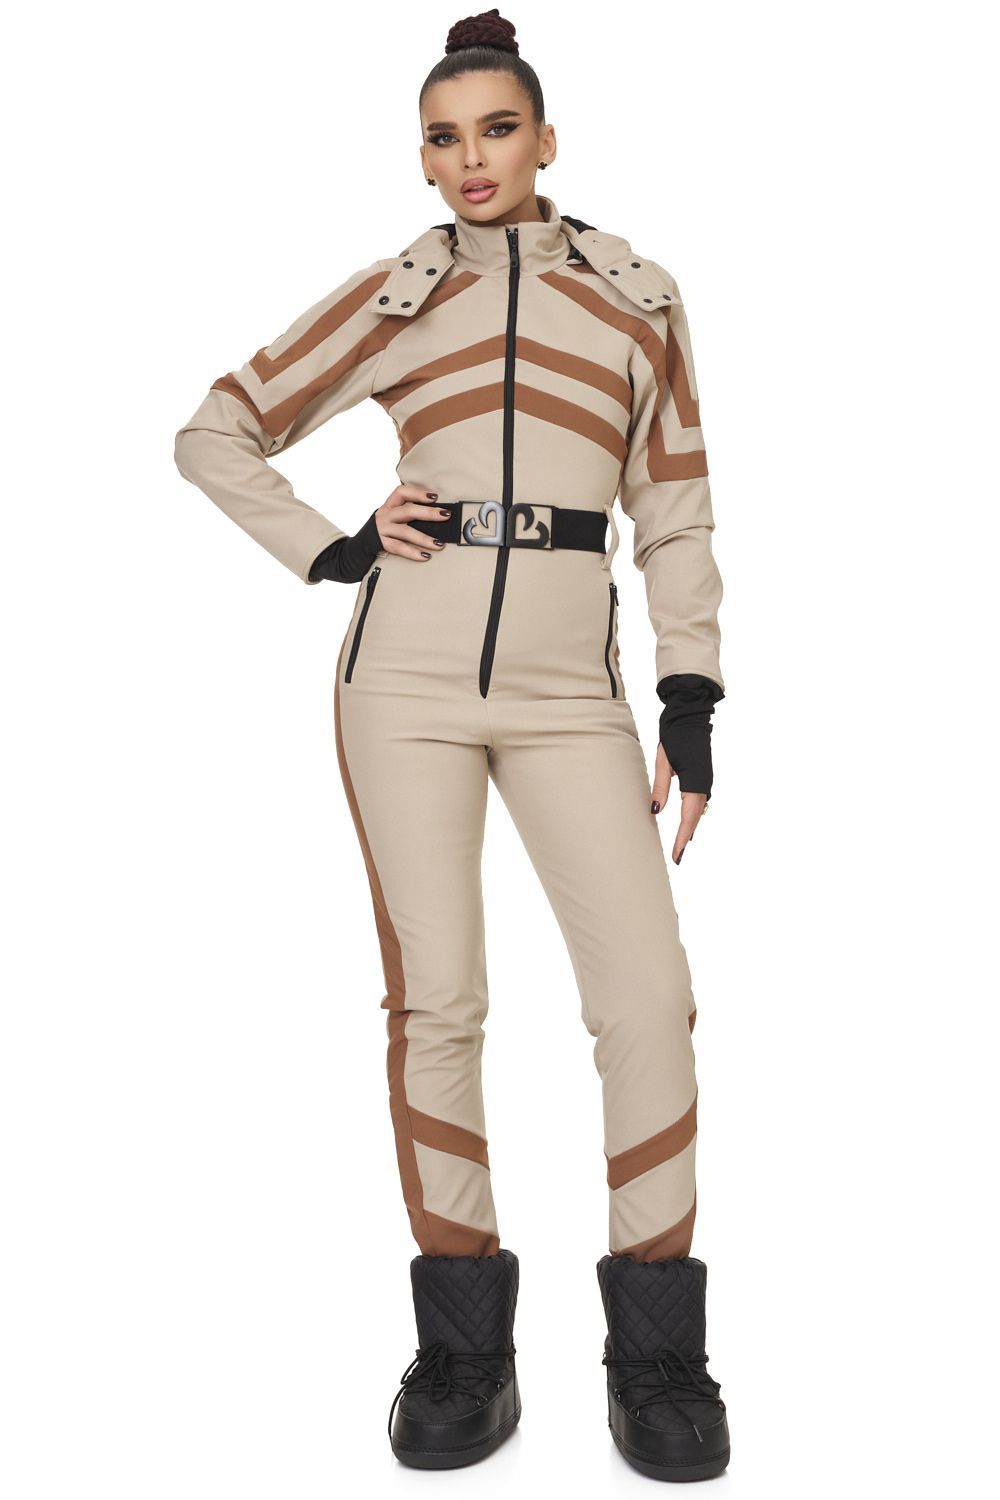 Abyem Bogas beige casual ski overalls